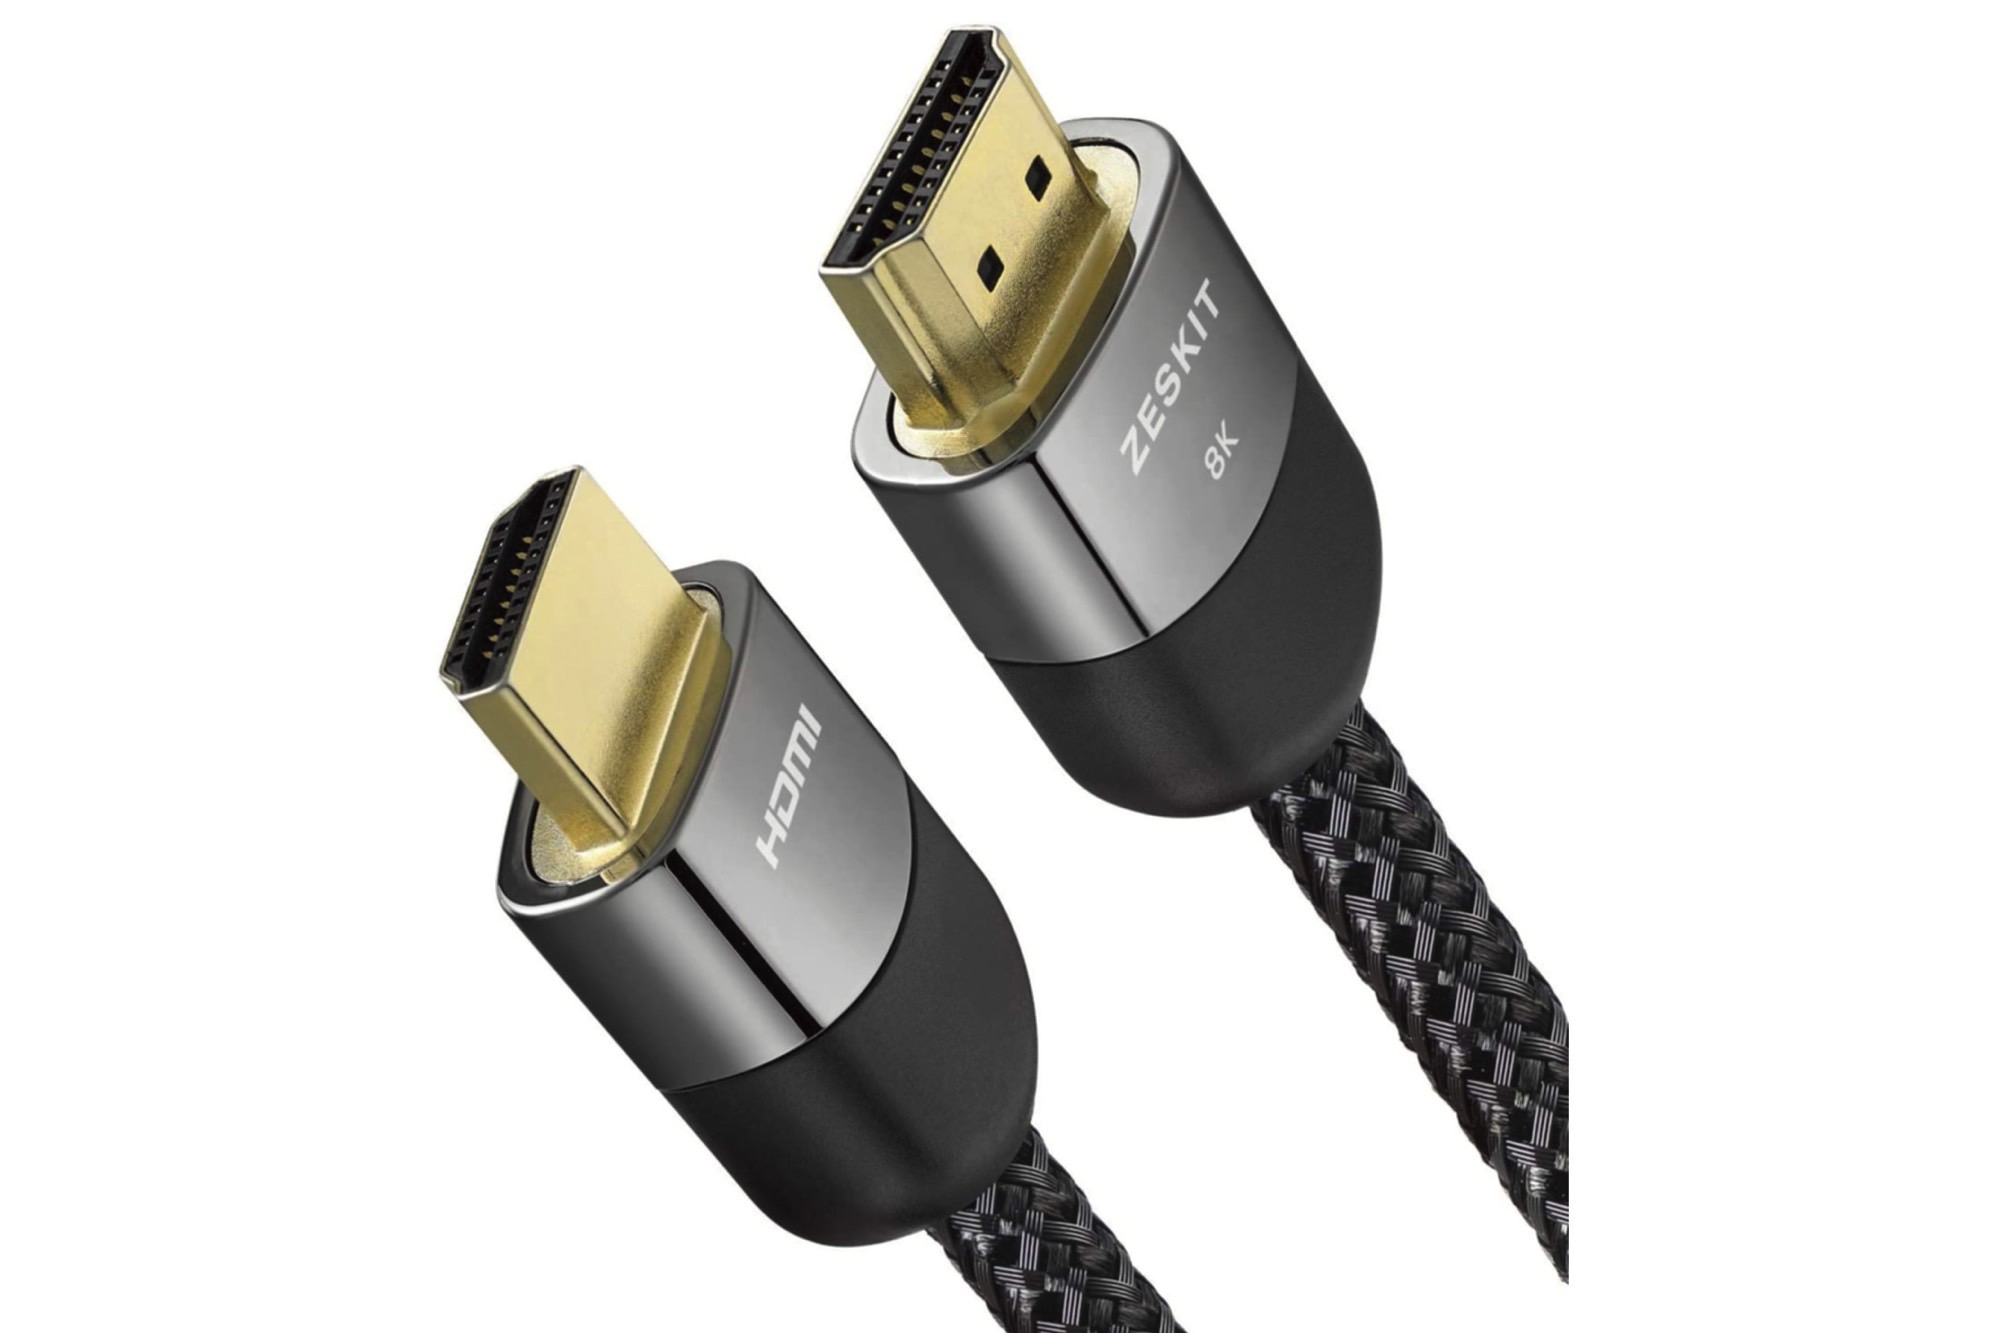 Highspeed HDMI Cable with Ethernet Channel 1.4 A M/MicroD M, 5m - HDMI  Cables - Multimedia Cables - Cables and Sockets